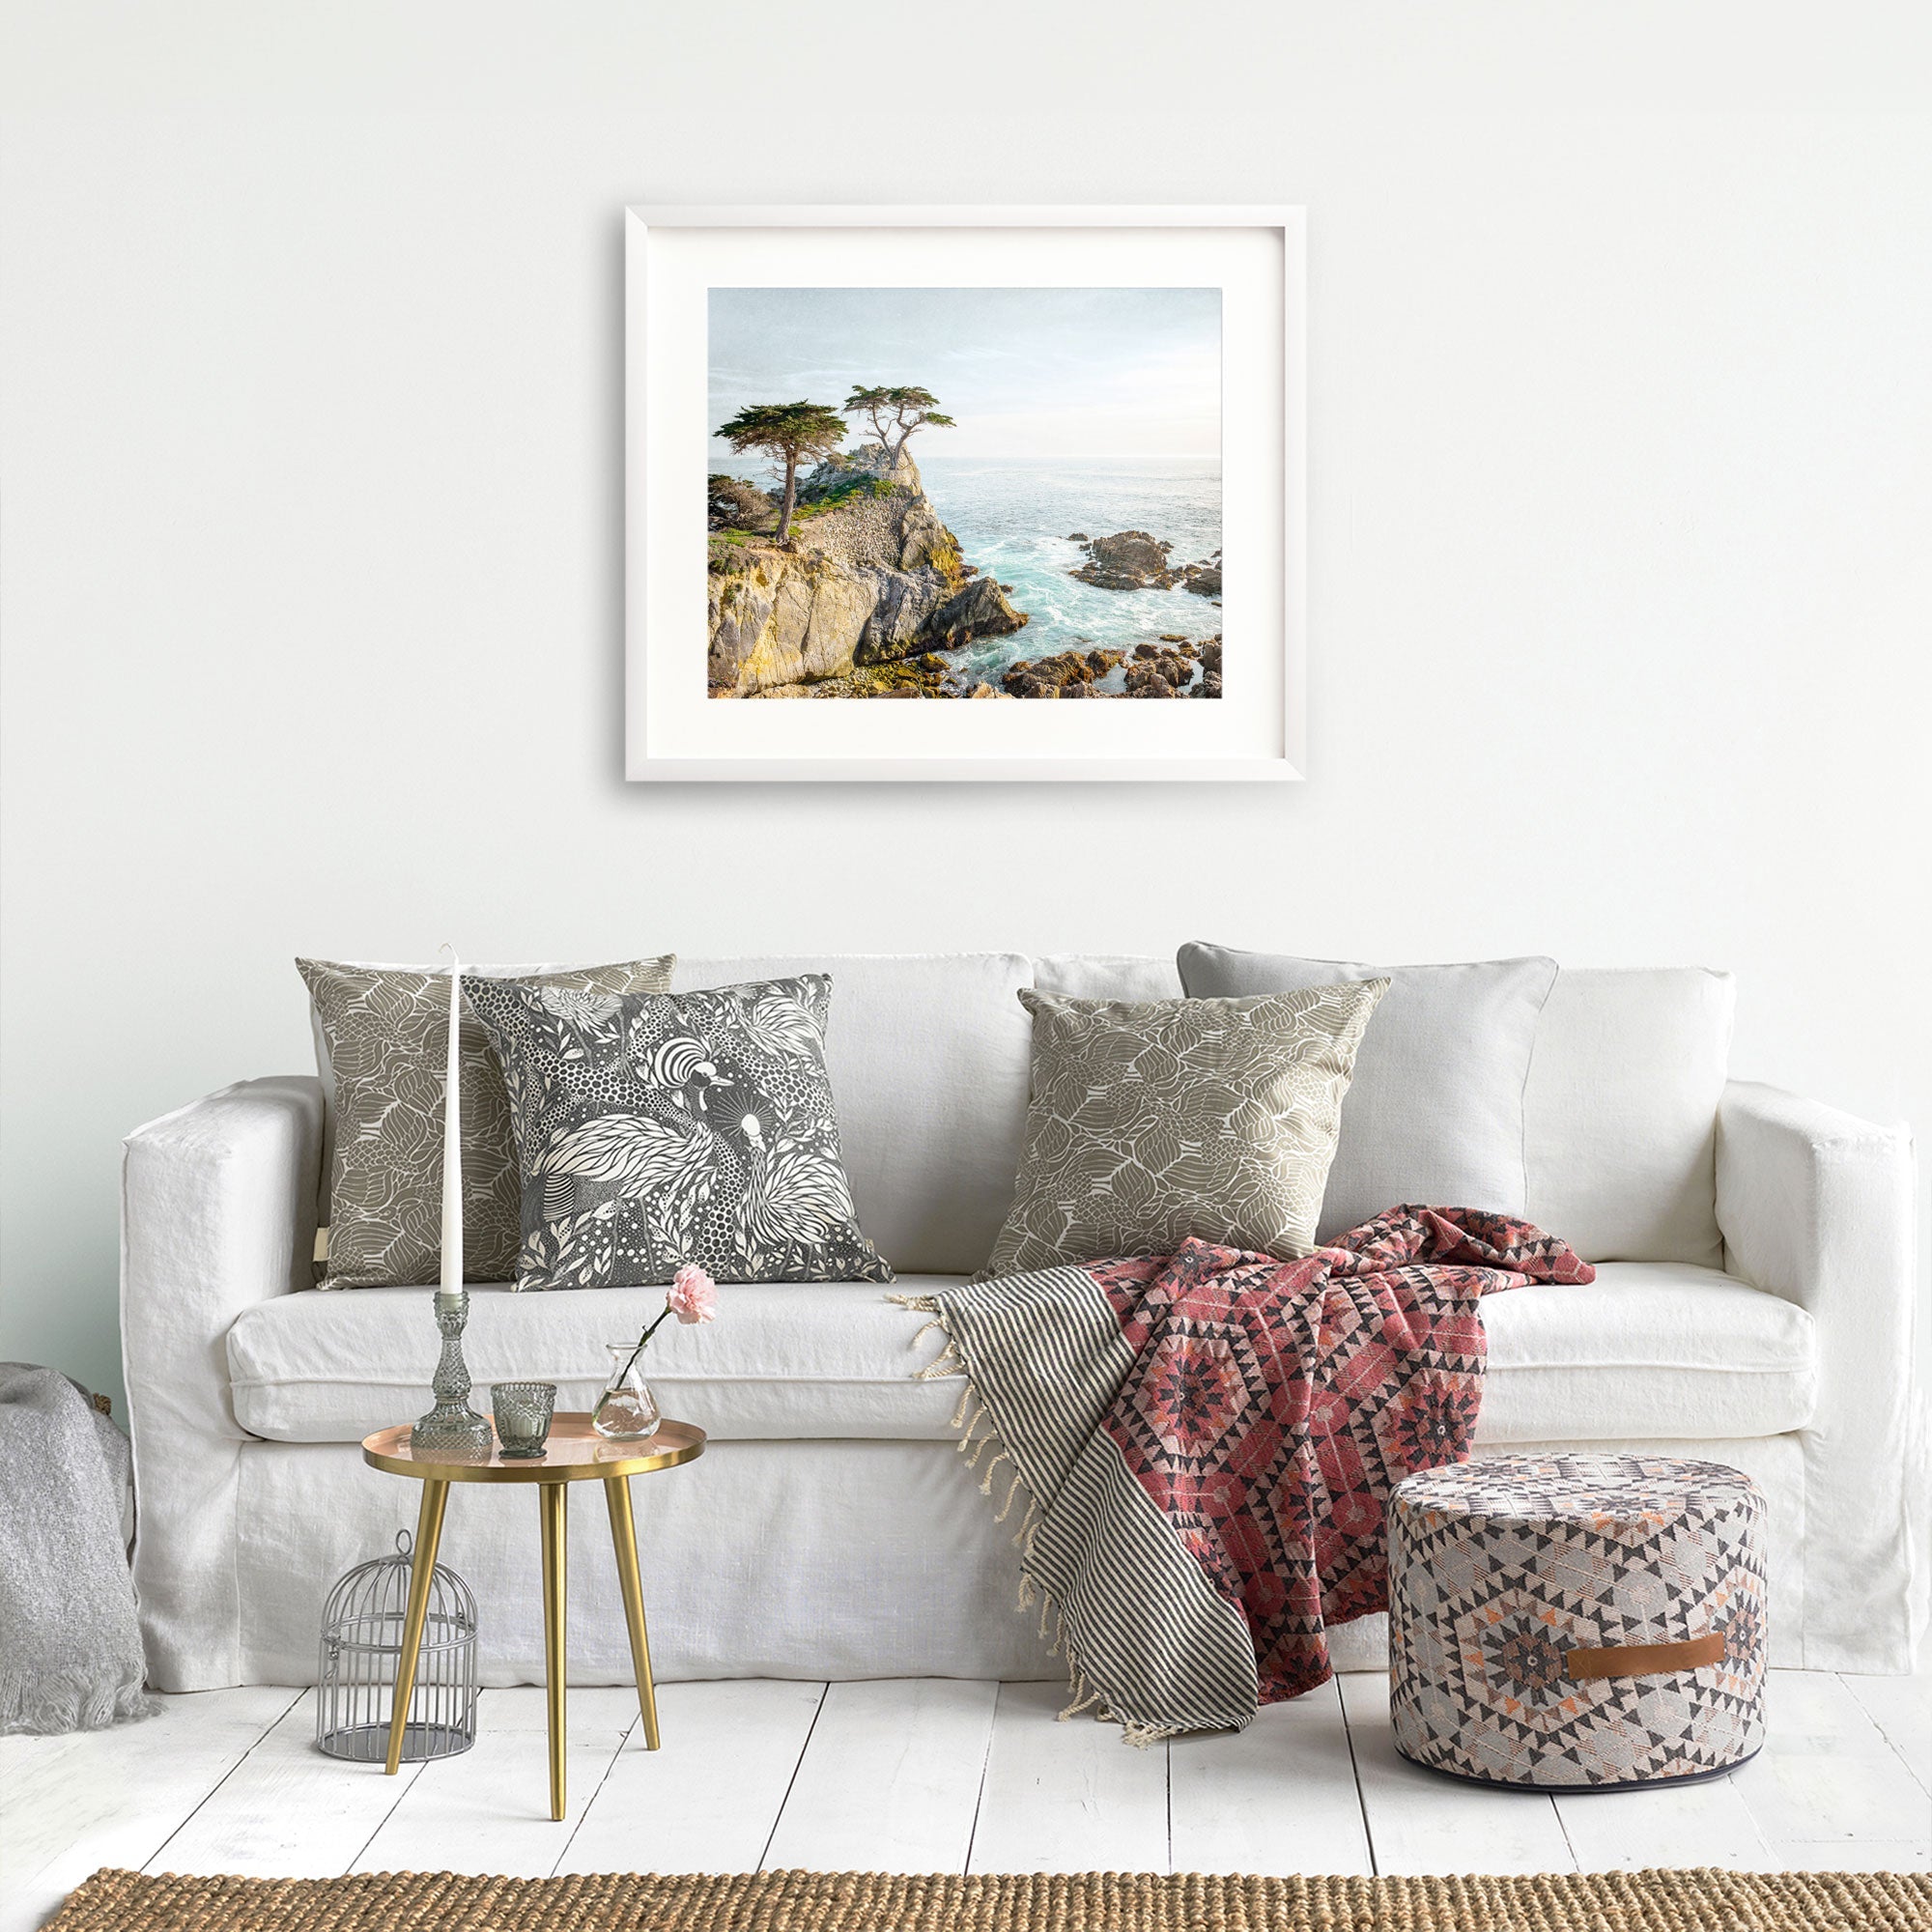 A cozy living room setup featuring a white sofa with decorative pillows, a red throw, a small round table with unframed prints and books, and an Offley Green California Coastal Print, &#39;Lone Cypress&#39; painting on the wall.